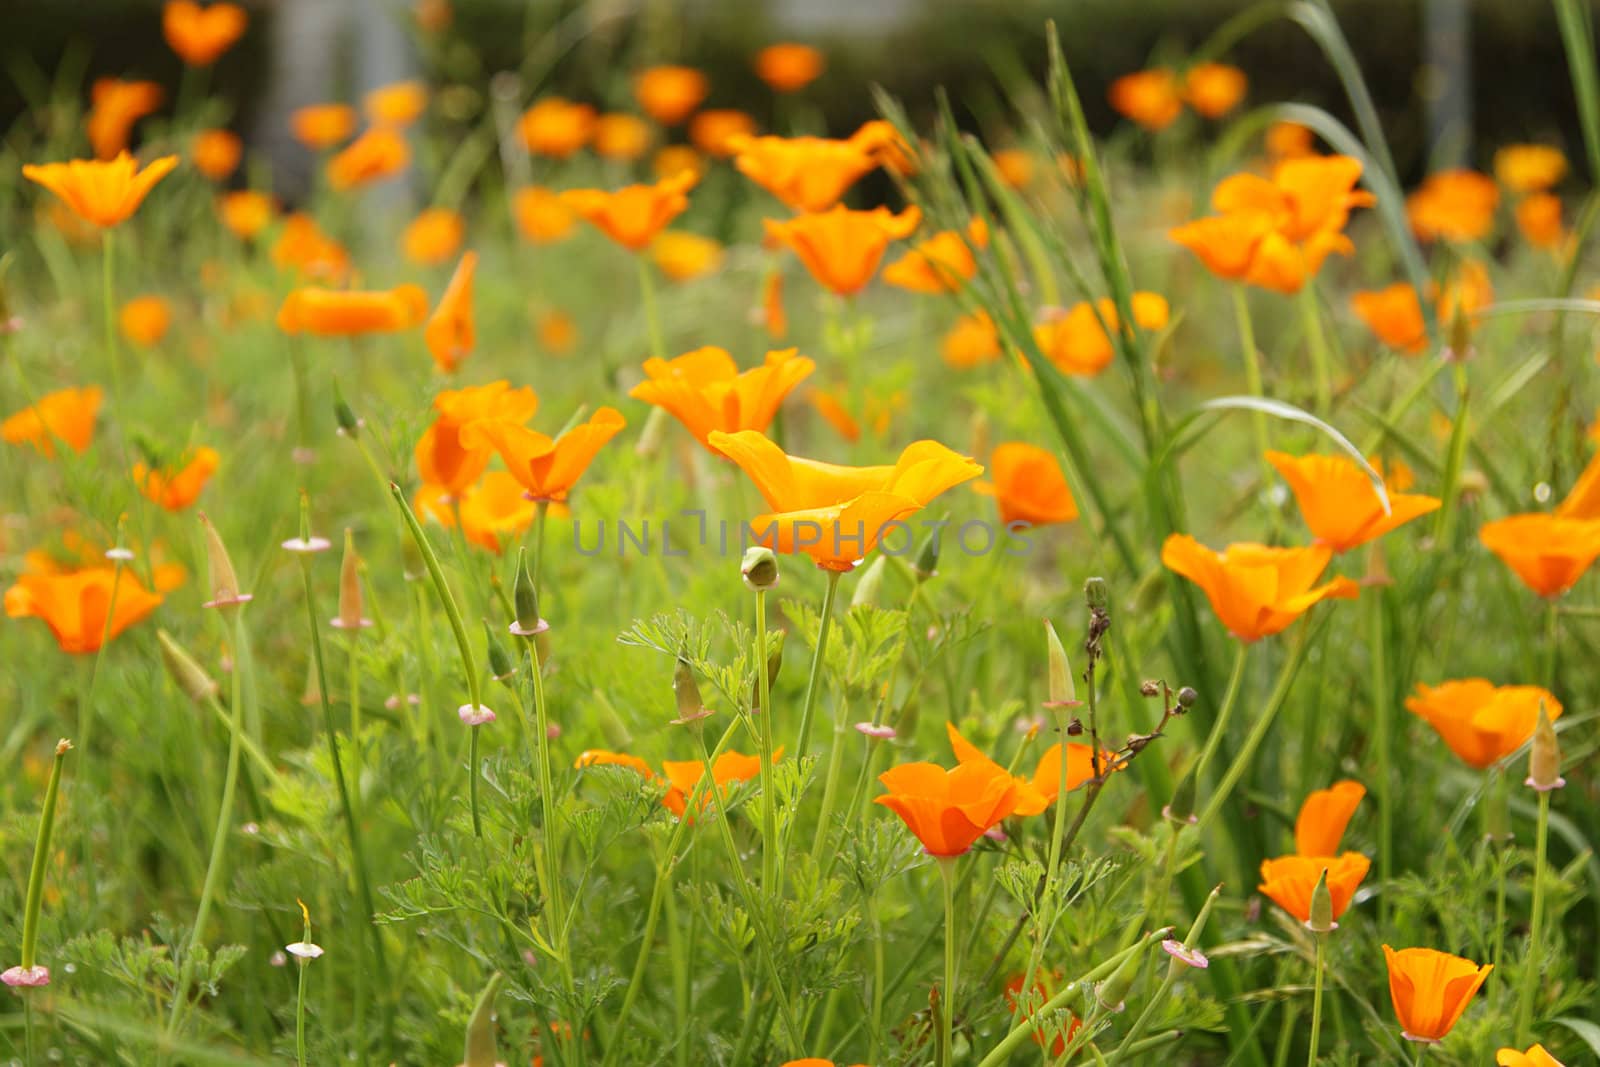 California poppies by pulen